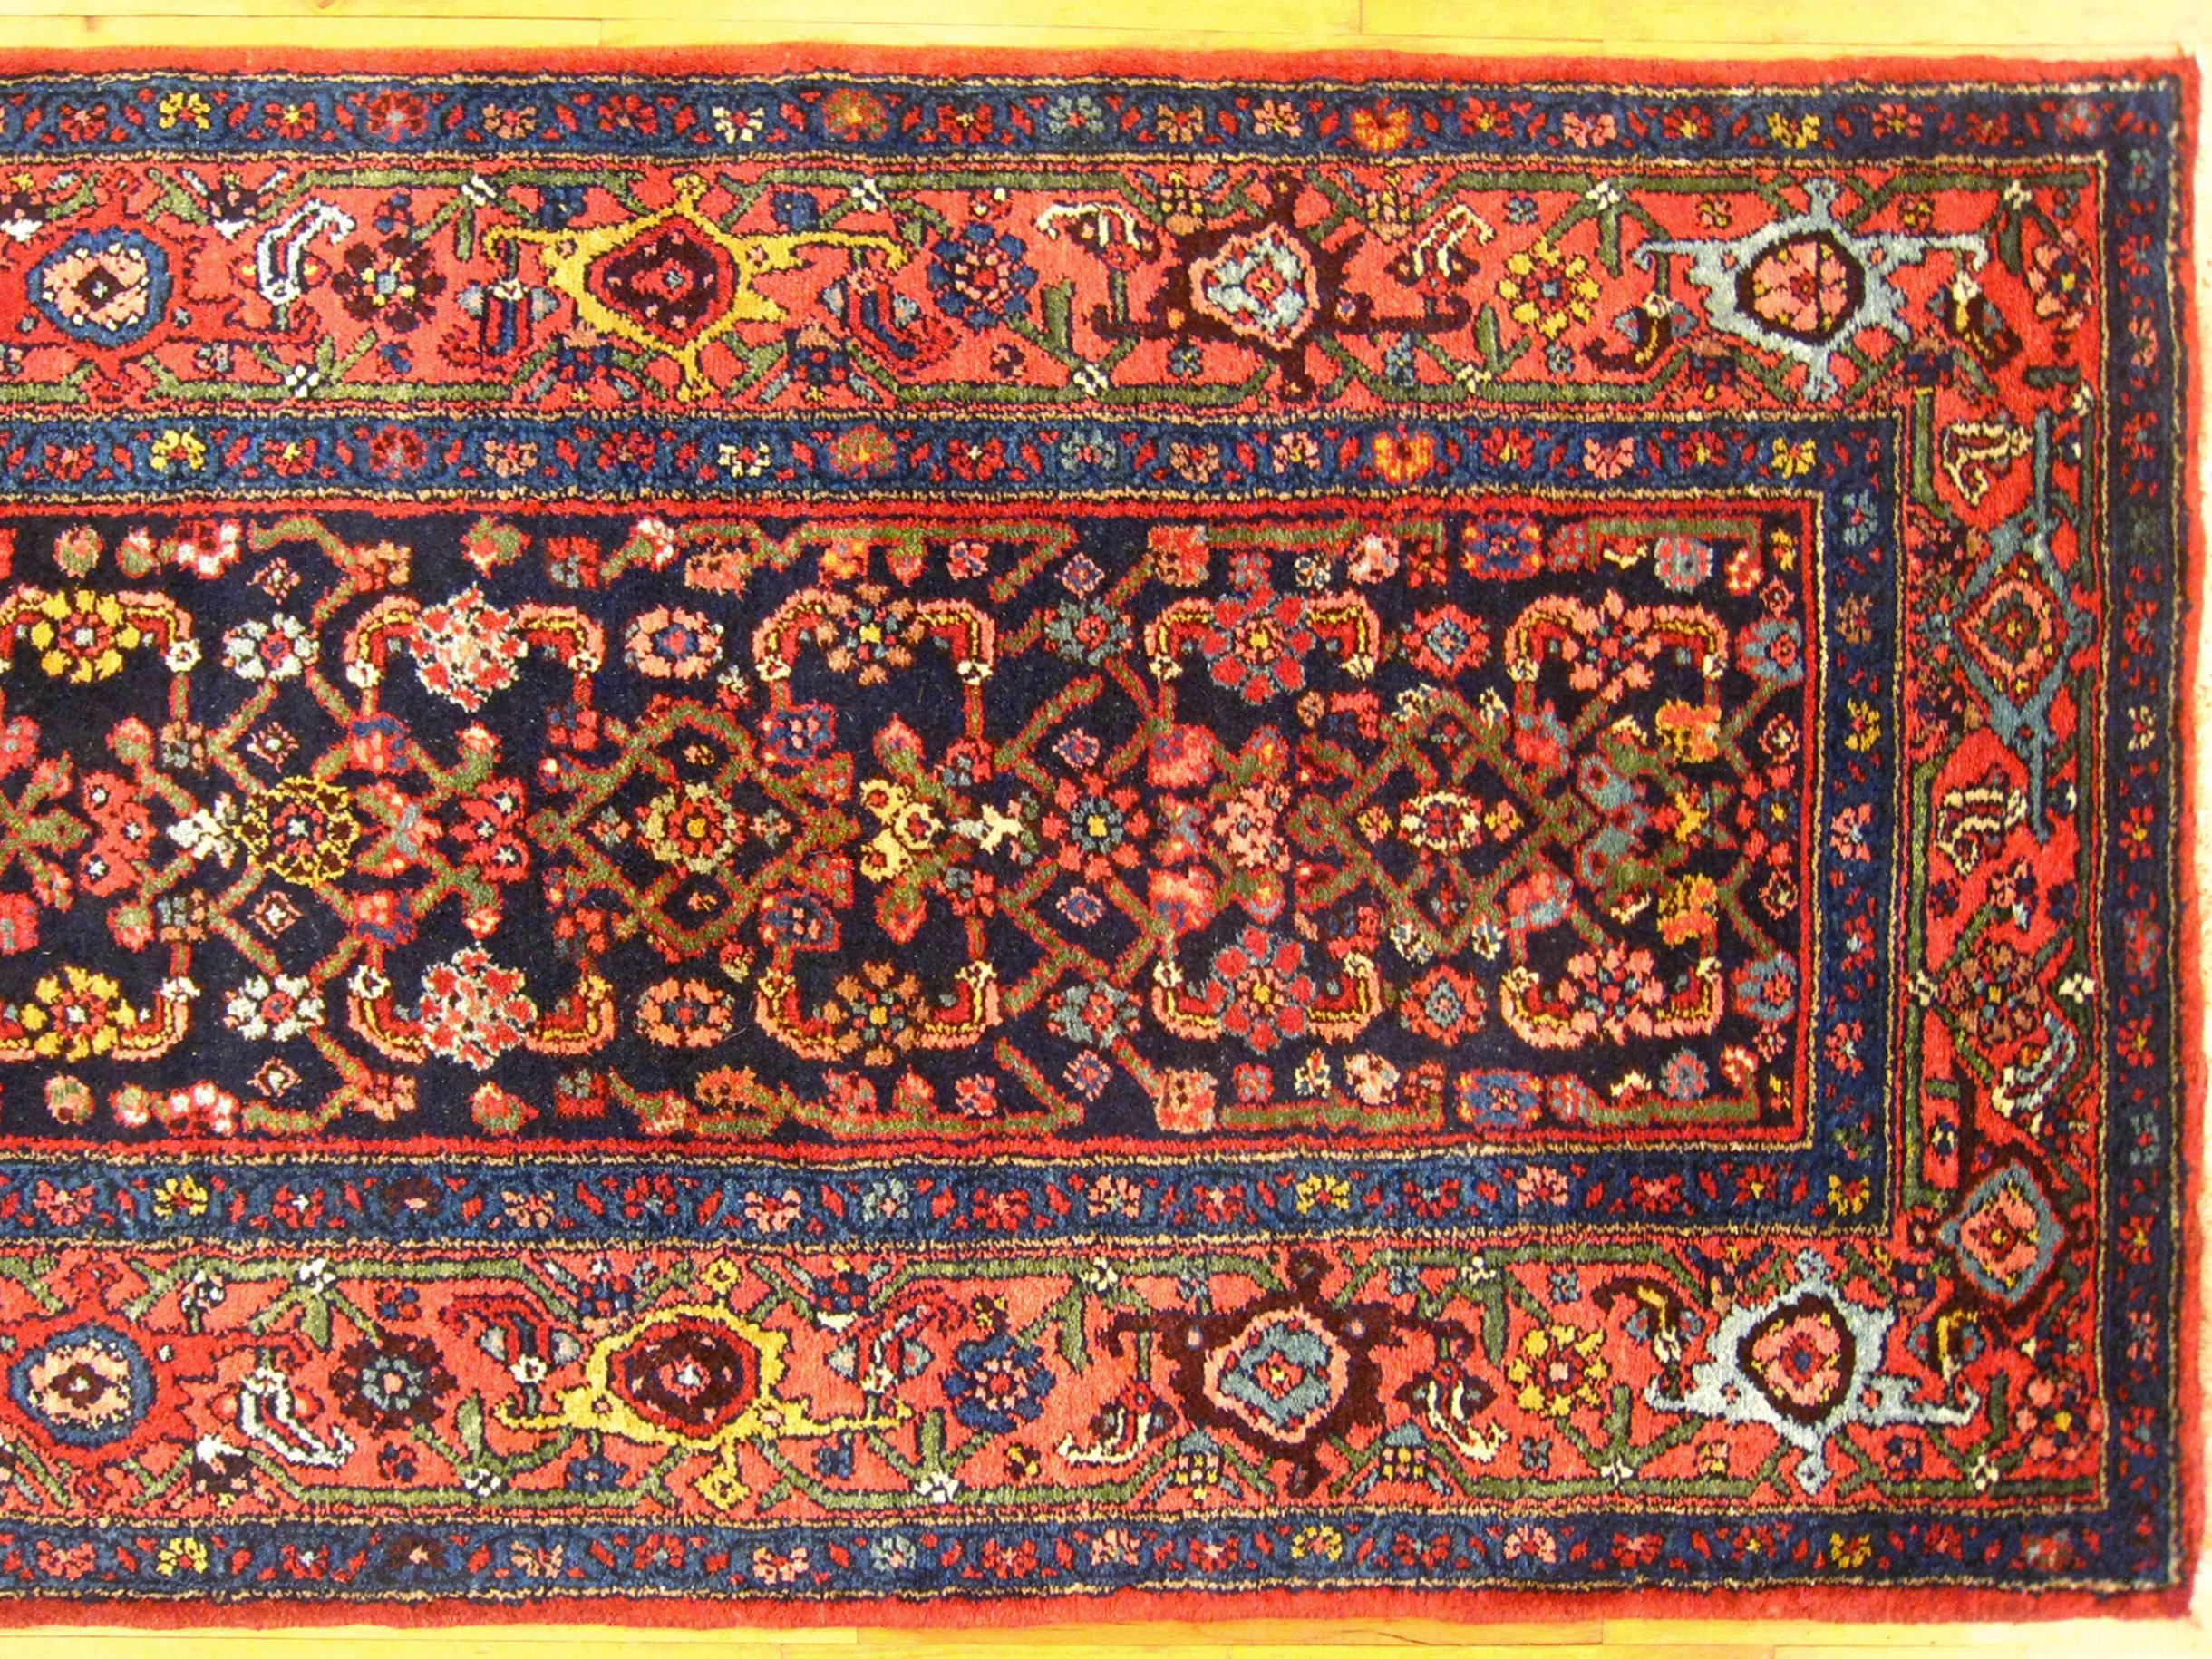 Antique Persian Hamadan Rug, Runner Size w/ Repeating Herati Design & Thick Pile In Good Condition For Sale In New York, NY